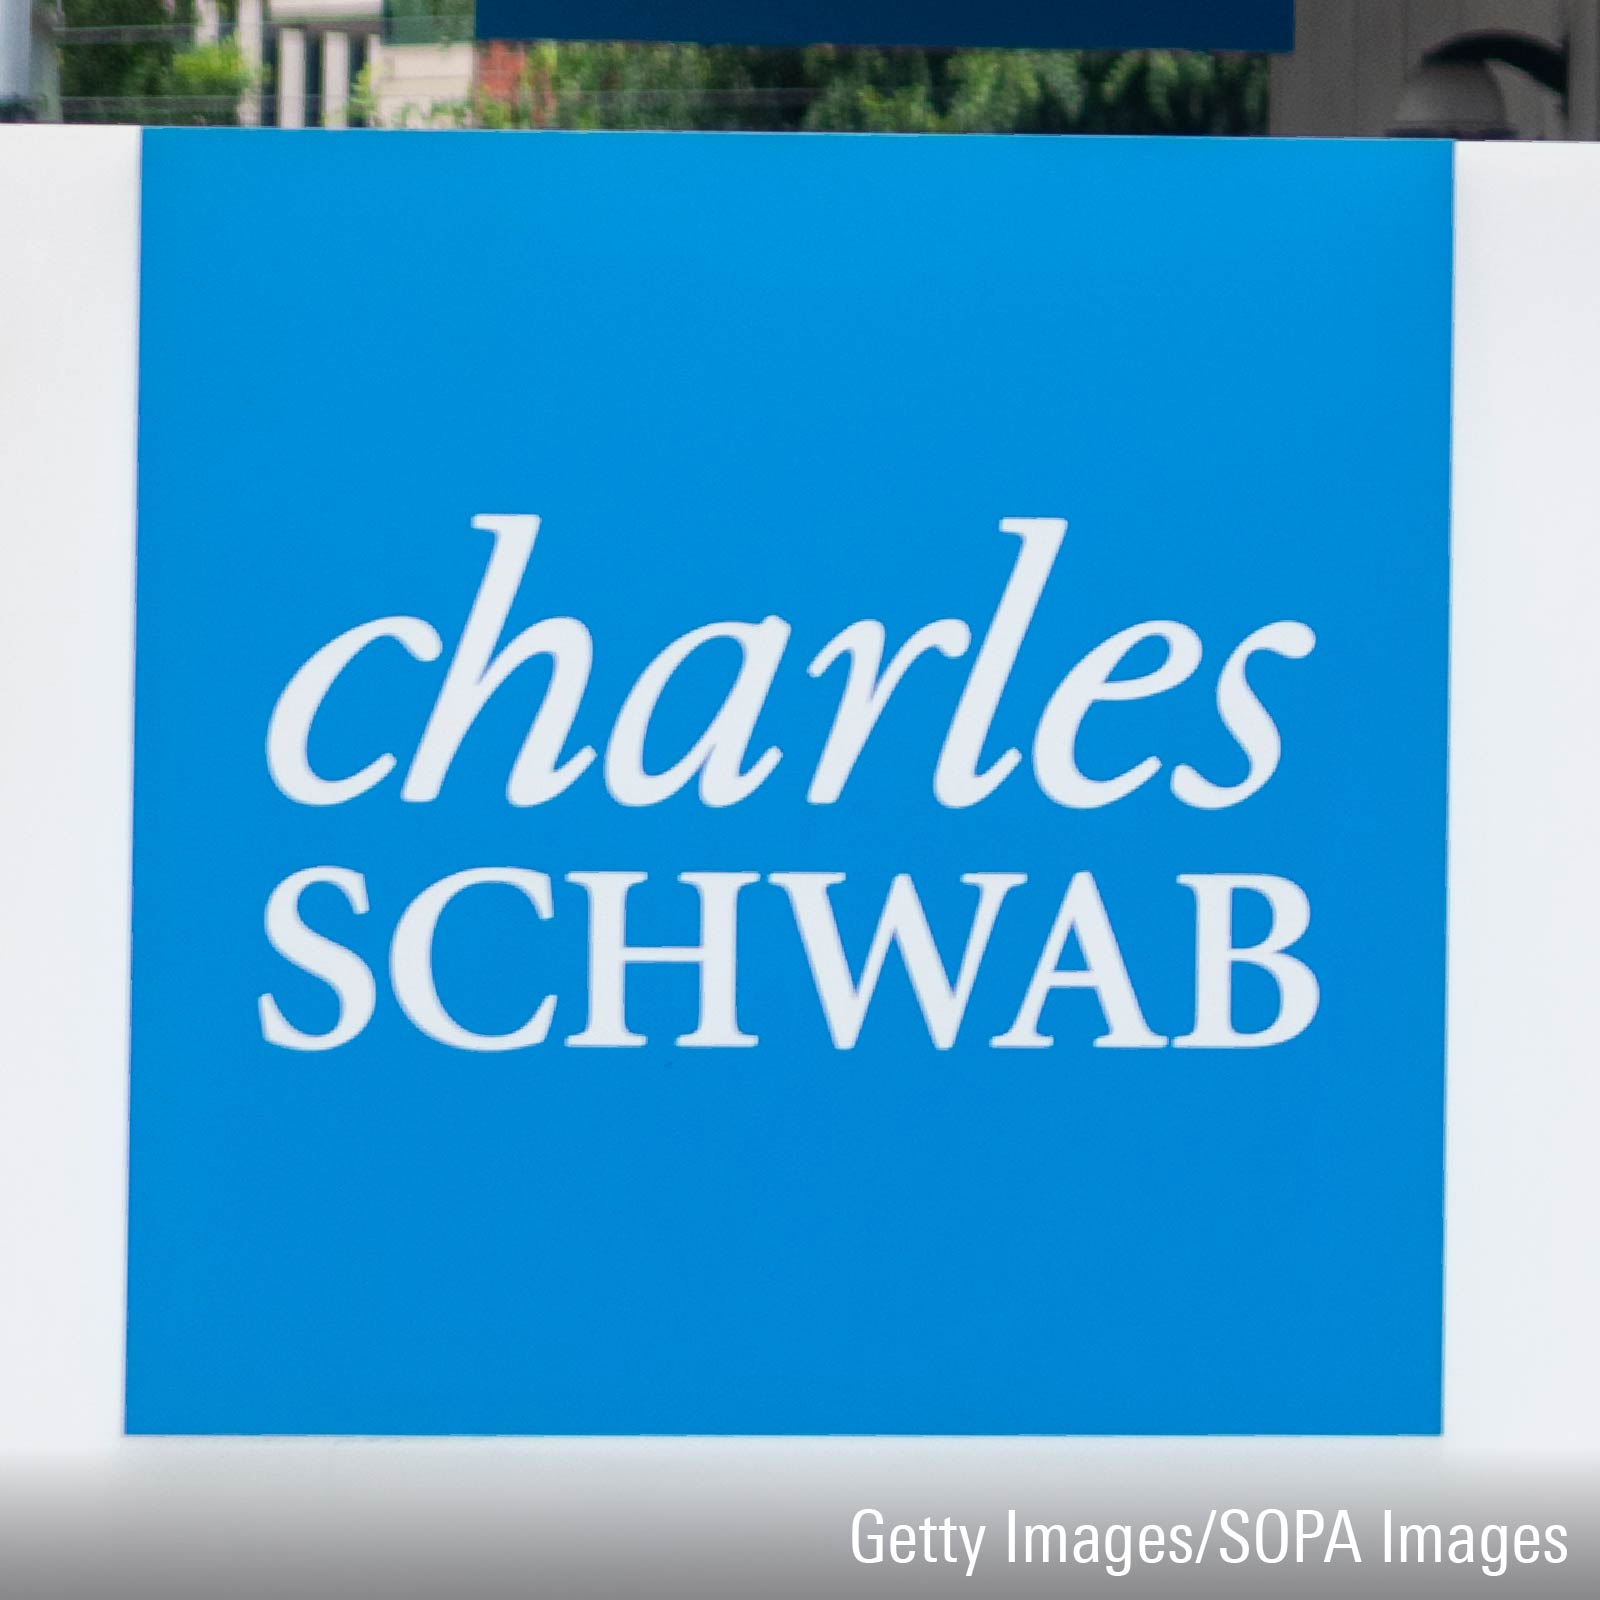 Charles Schwab logo in full color on large sign placed outside of San Francisco office building.